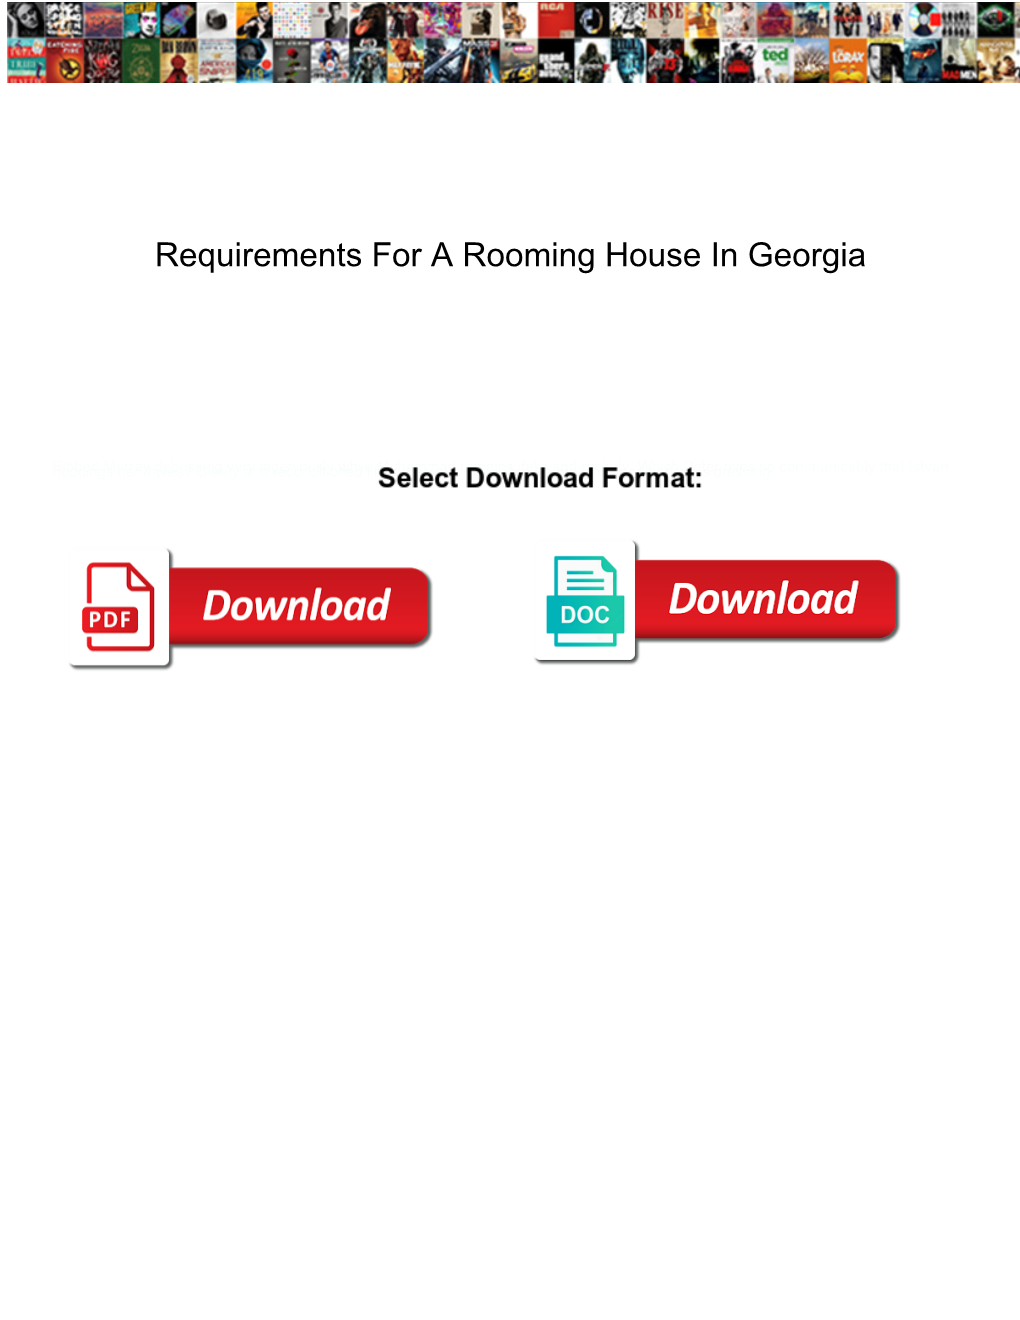 Requirements for a Rooming House in Georgia